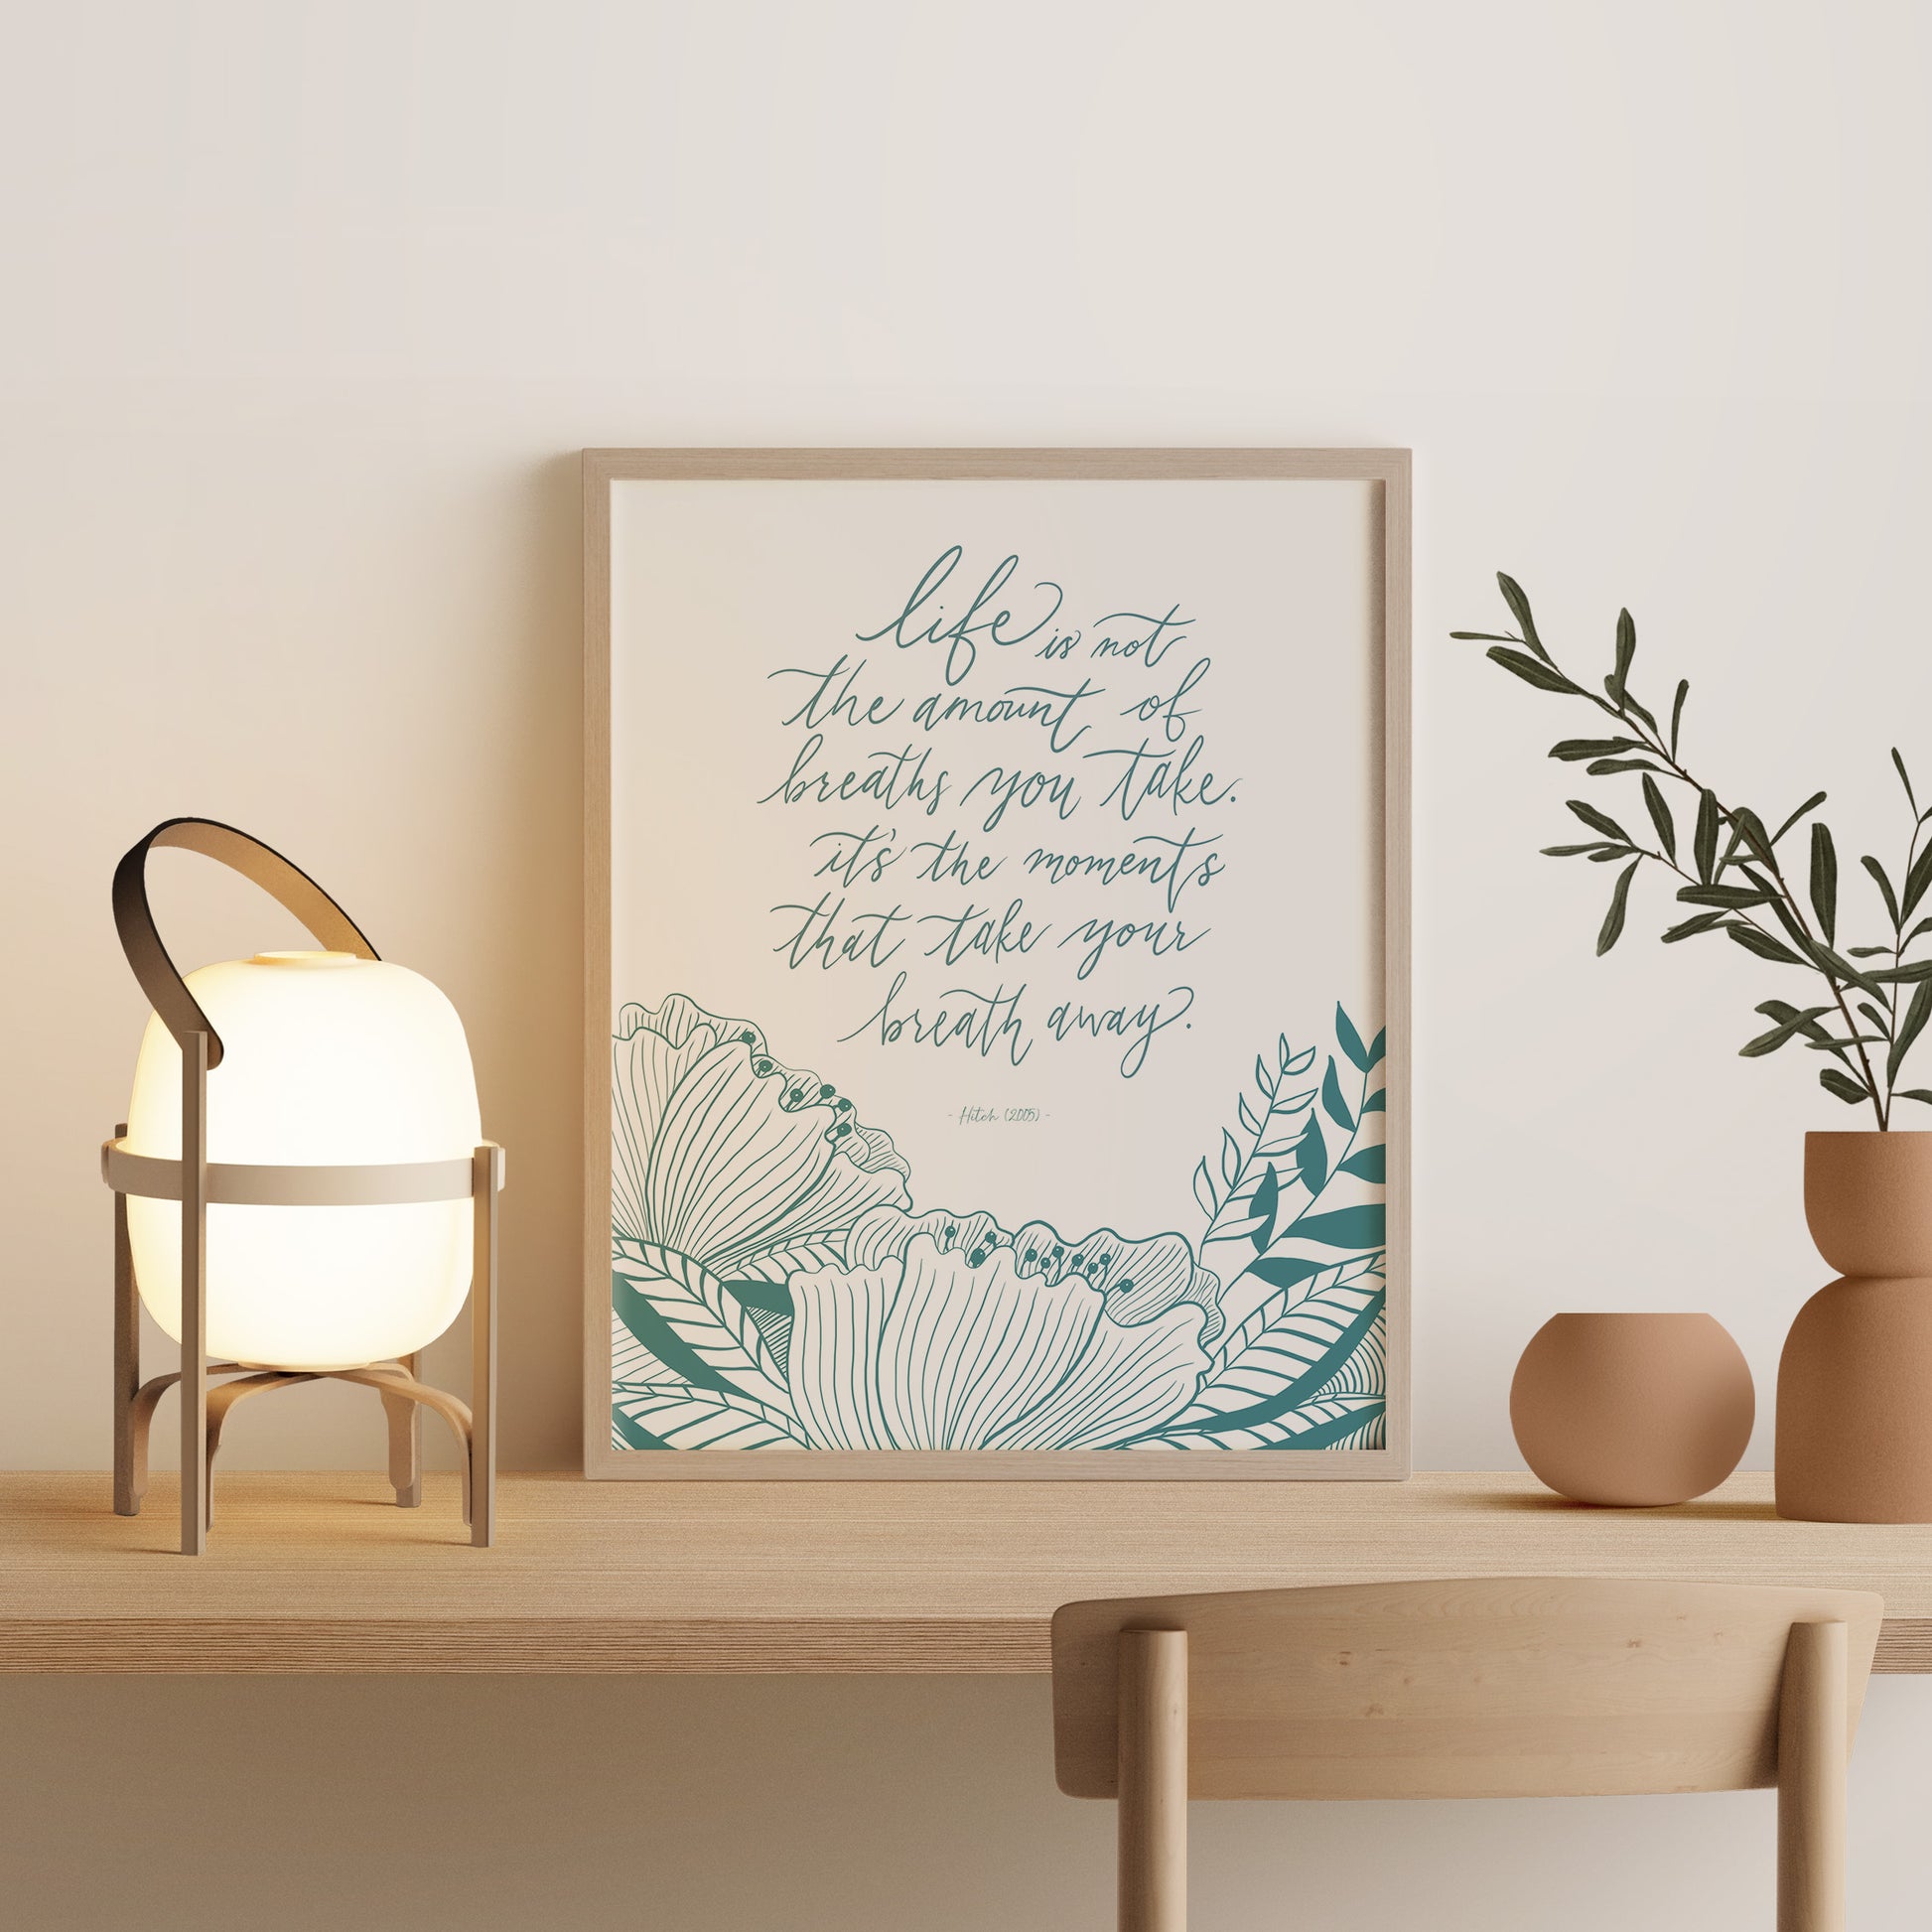 Framed art print of Hitch movie quote with blue floral drawing decor